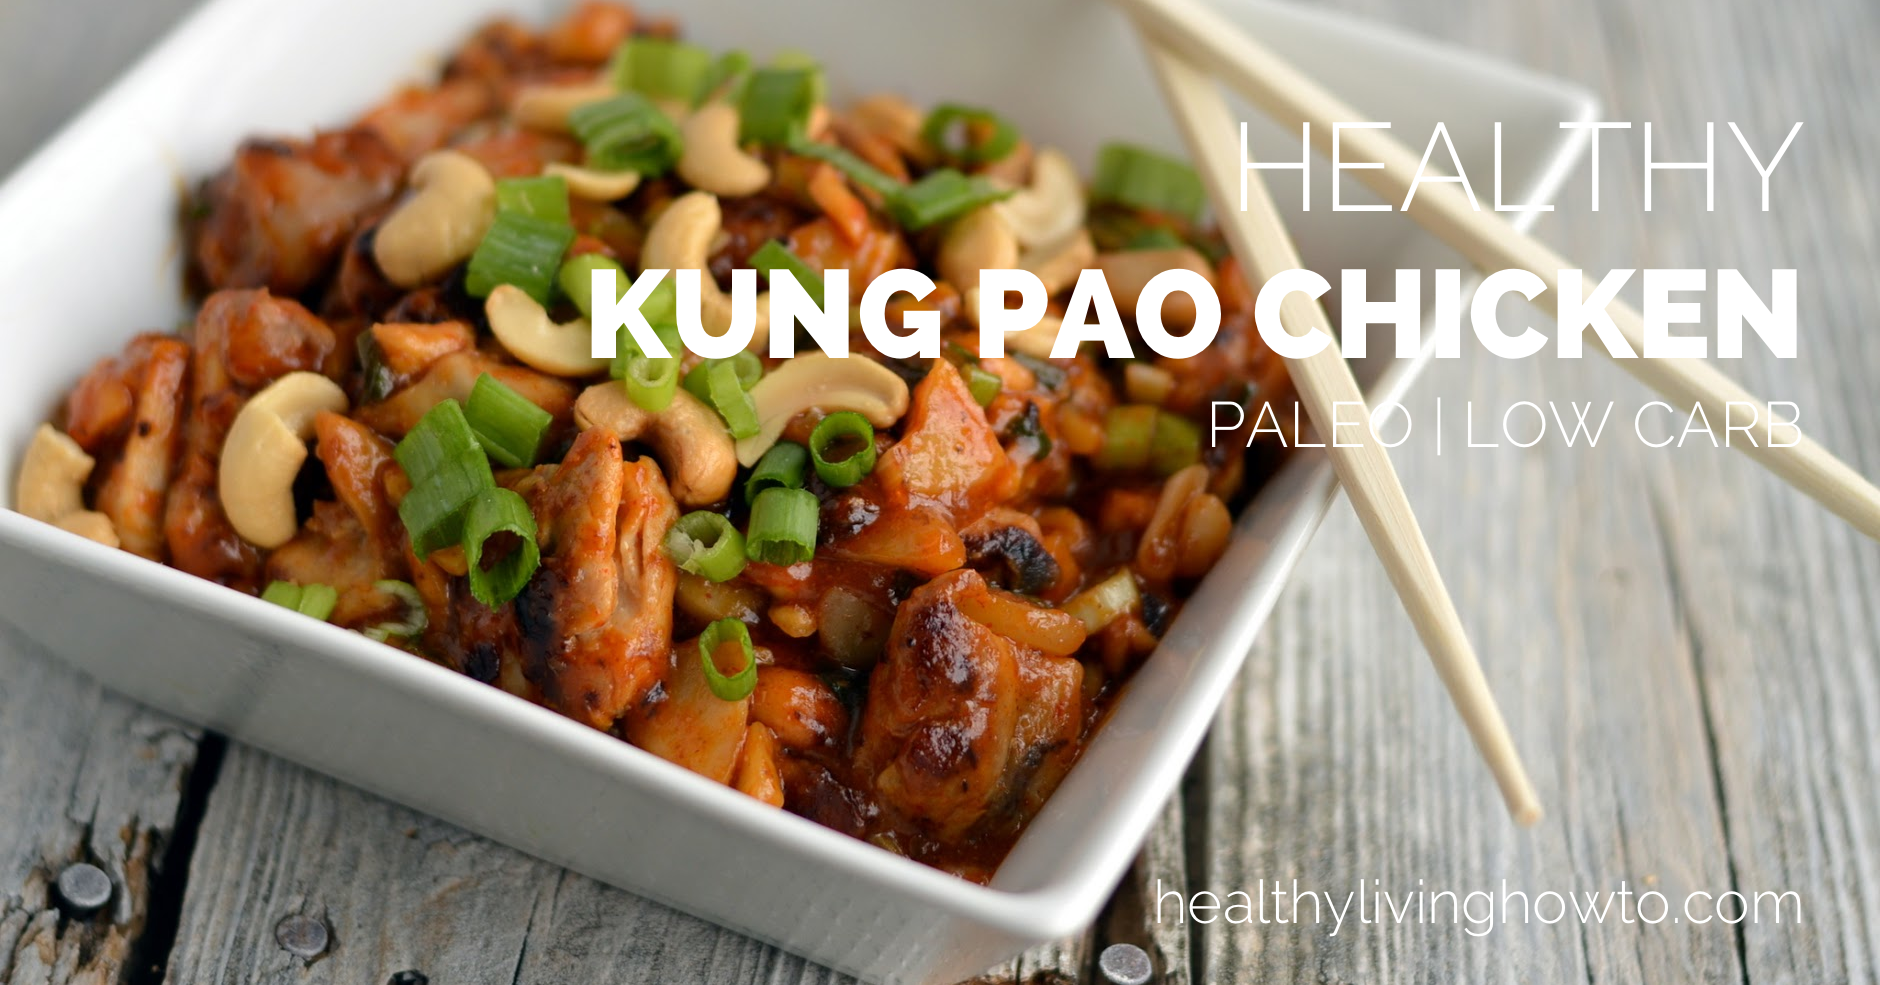 Healthy Kung Pao Chicken | healthylivinghowto.com